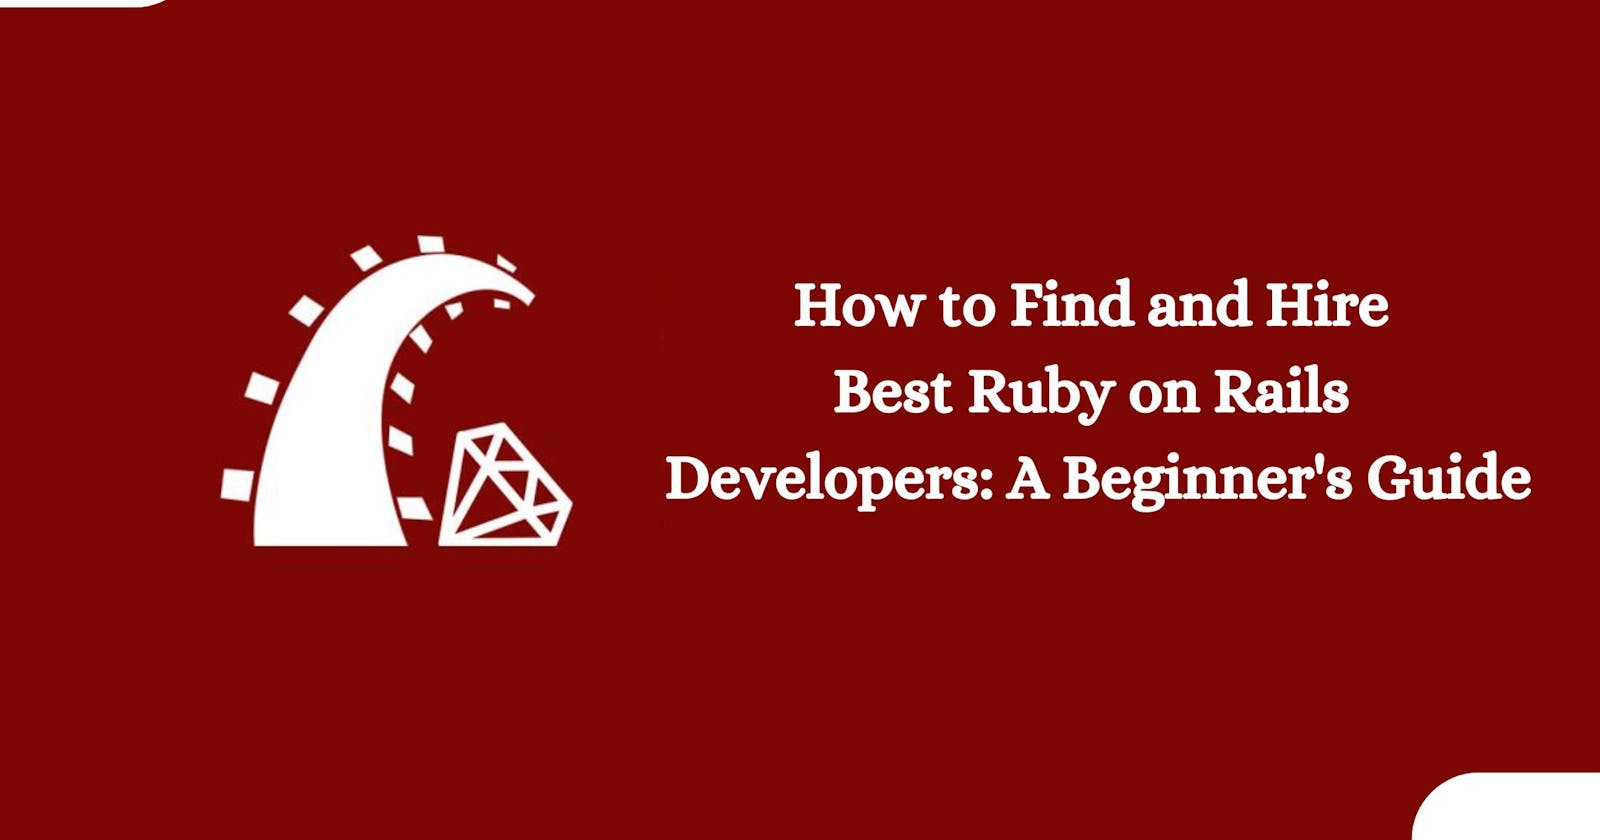 How to Find and Hire Best Ruby on Rails Developers: A Beginner's Guide